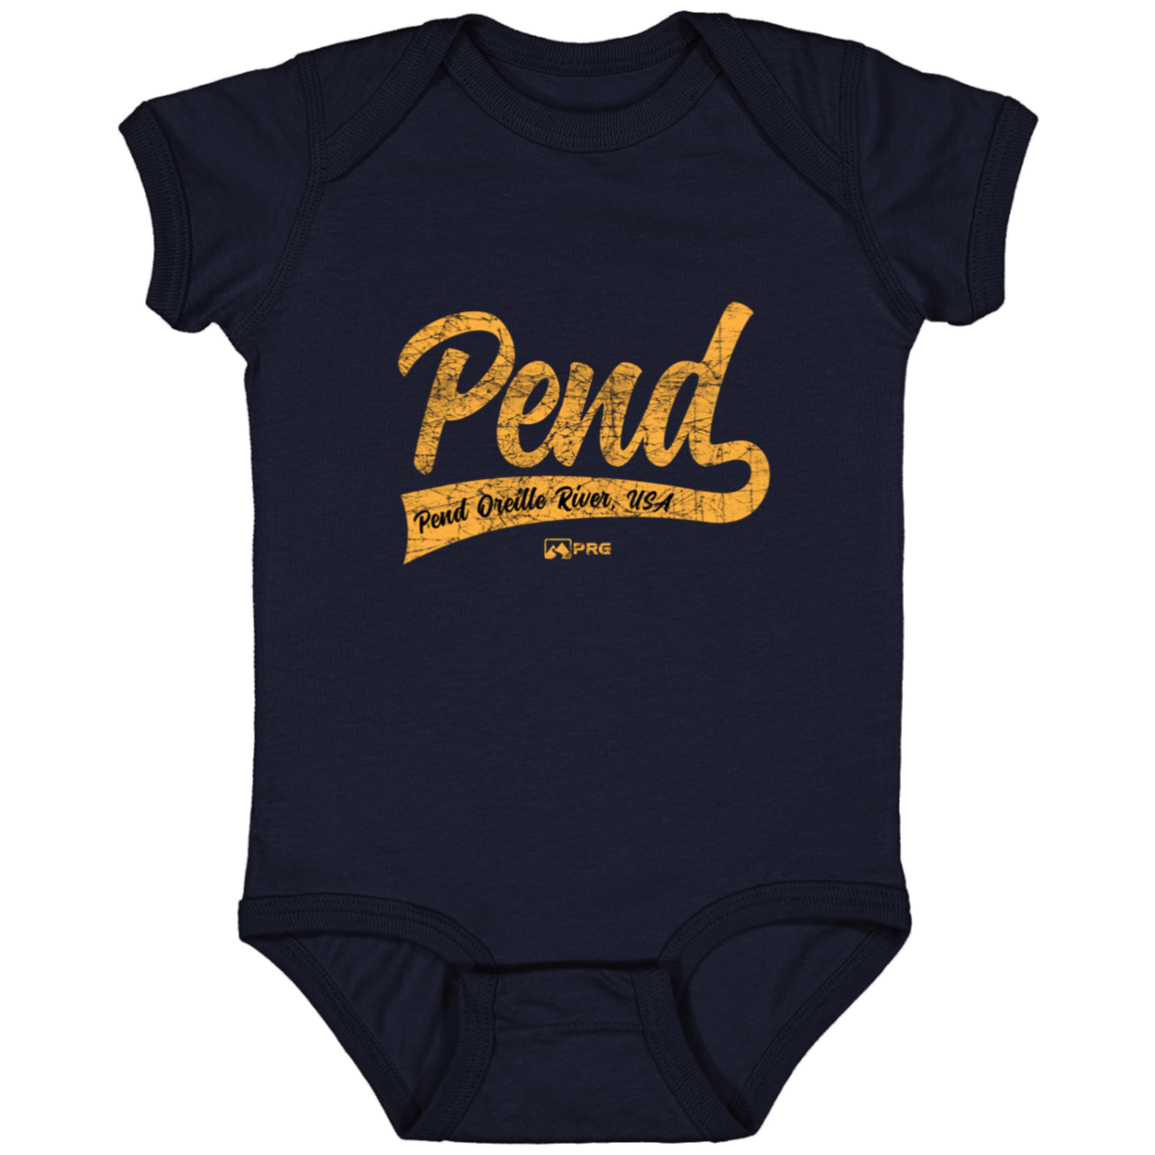 Pend for the Pennant - Infant Onesie